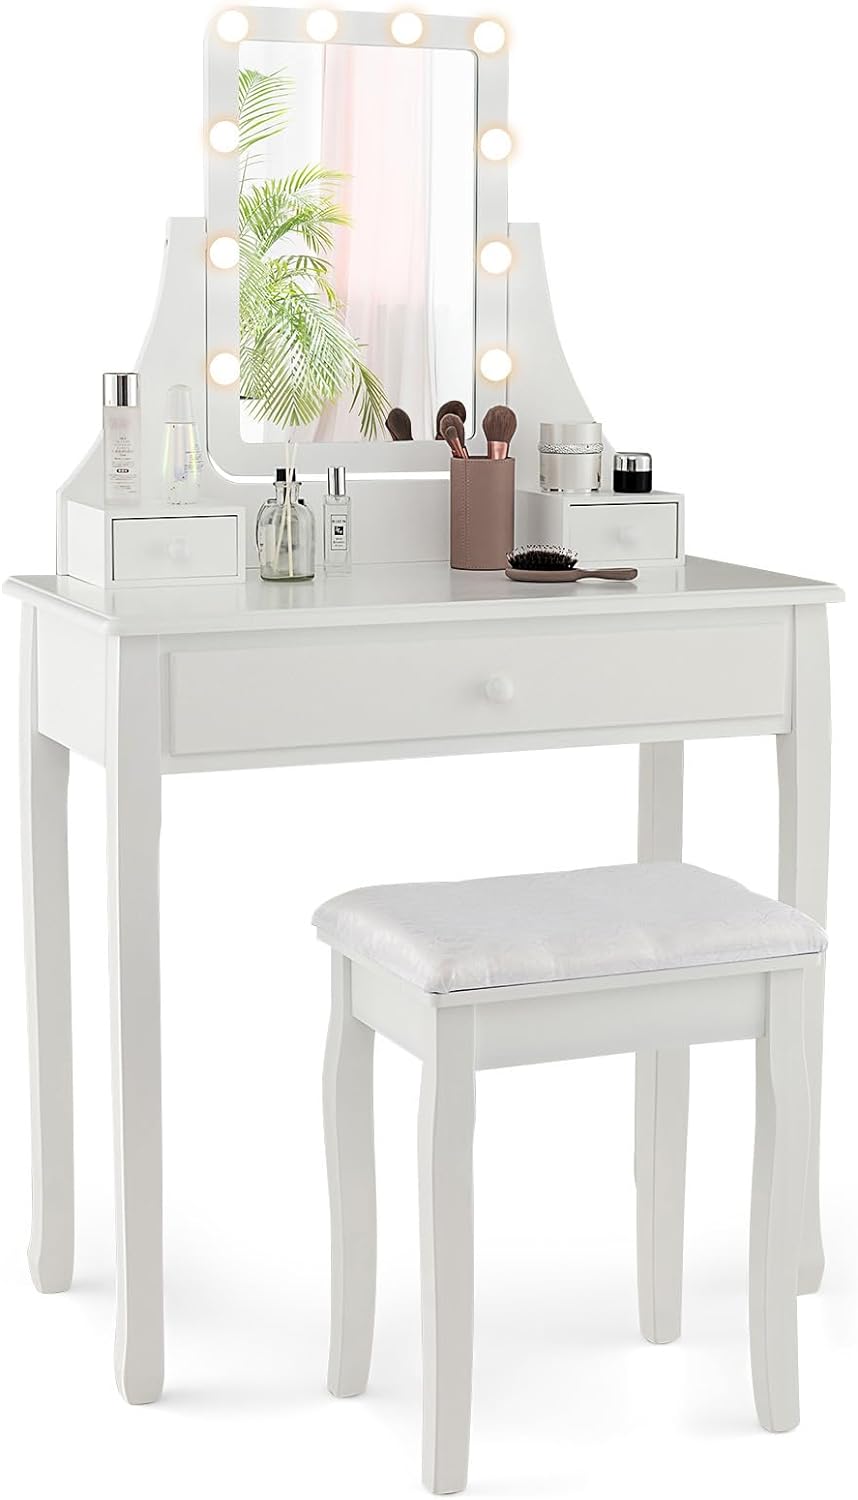 CHARMAID Makeup Vanity Desk with Lighted Mirror, 3 Color Lighting Modes, Adjustable Brightness, 3 Drawers